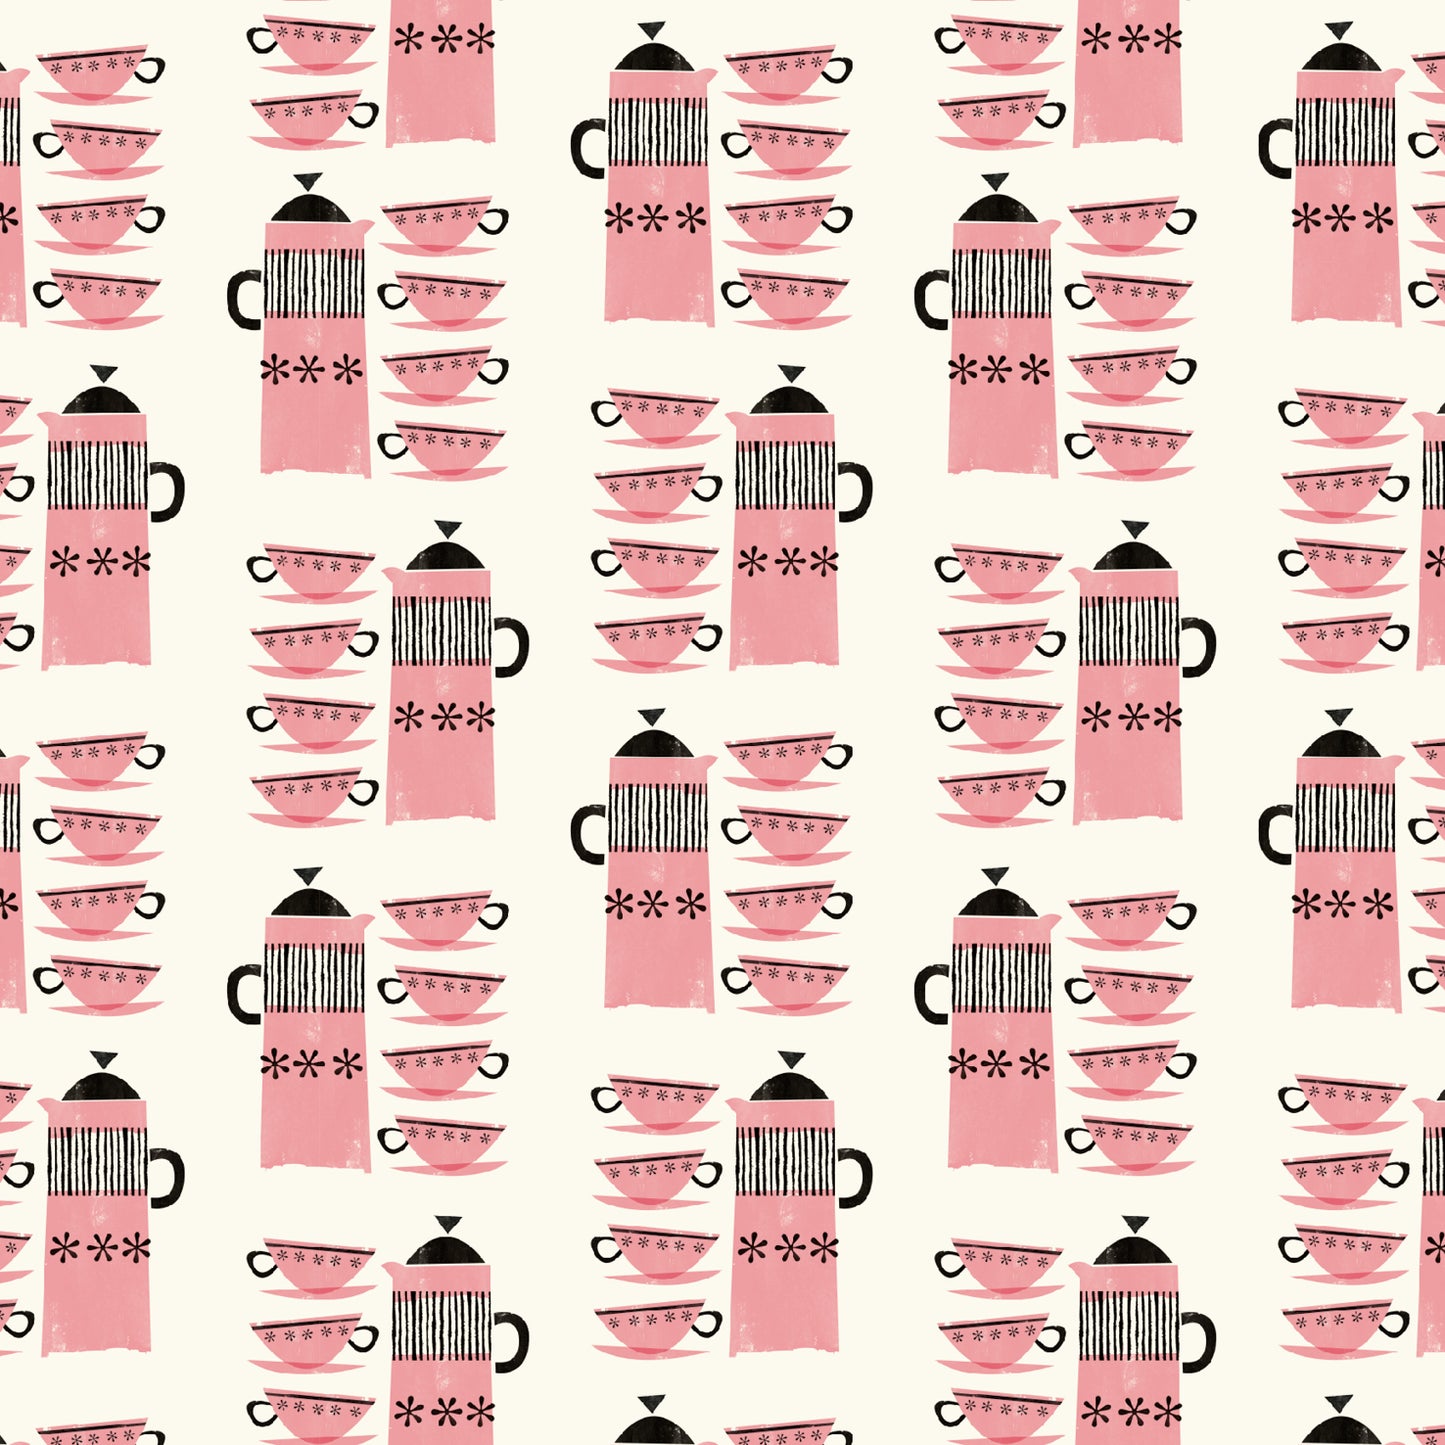 Just Patterns: Pink Coffee Pots